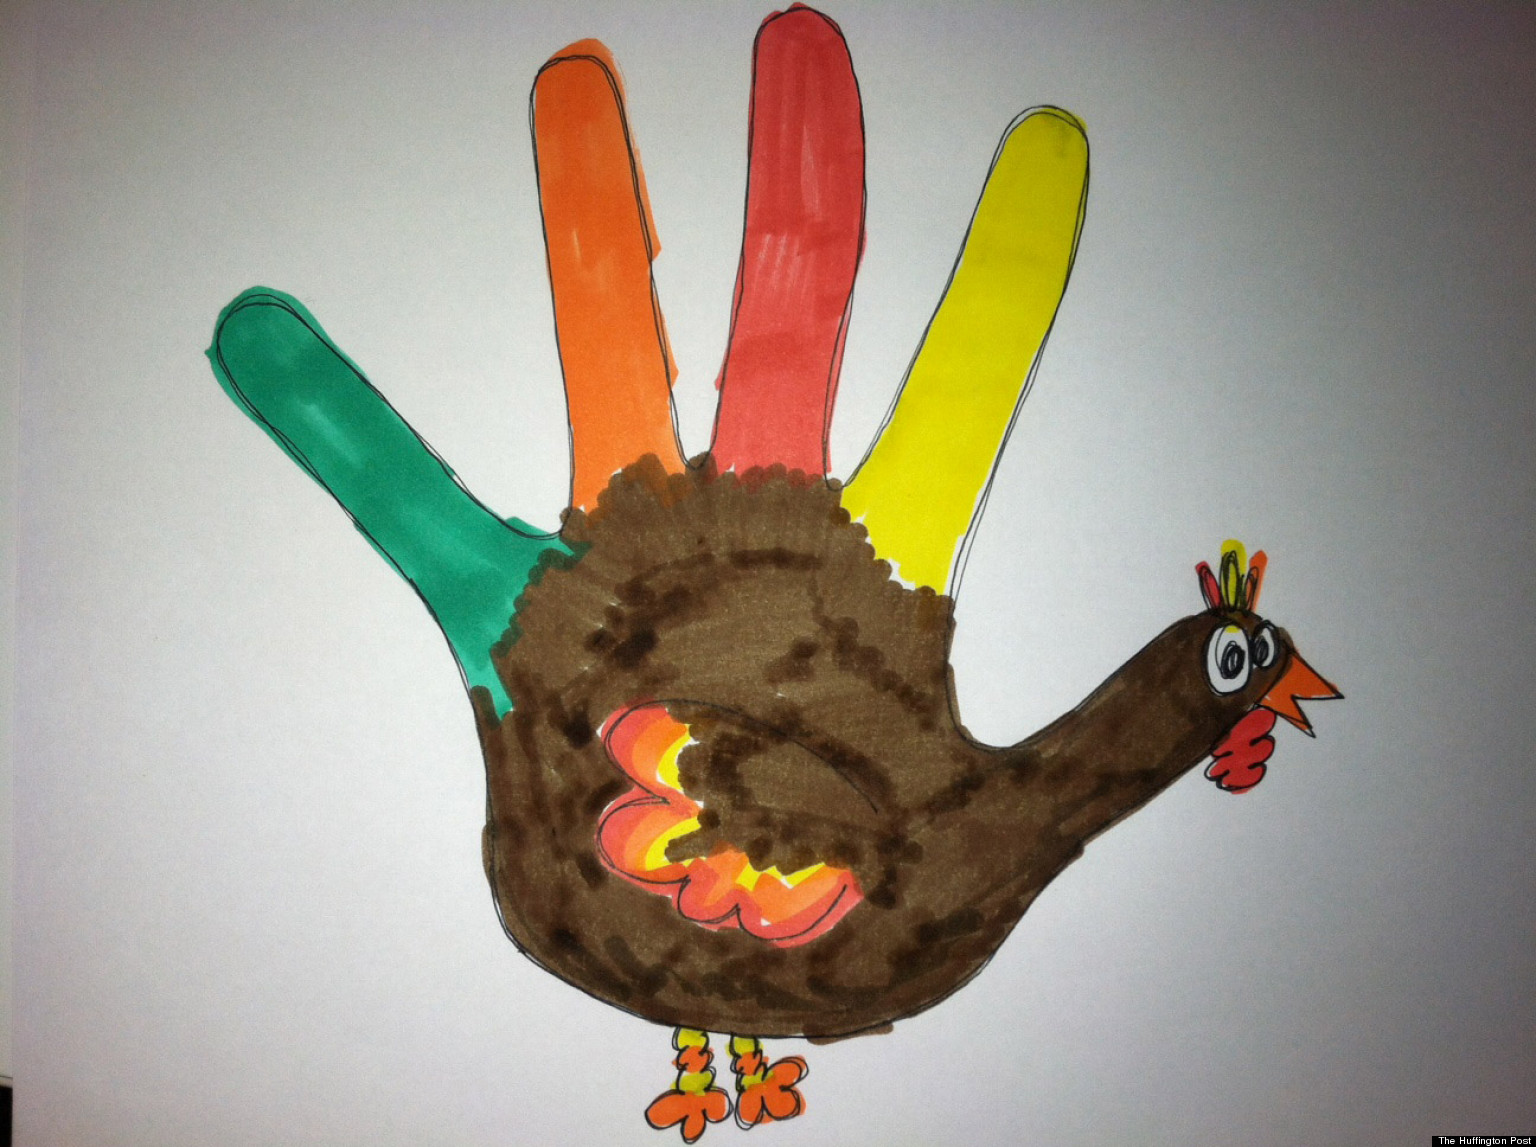 Top How To Draw A Turkey With Your Hand in the world The ultimate guide 